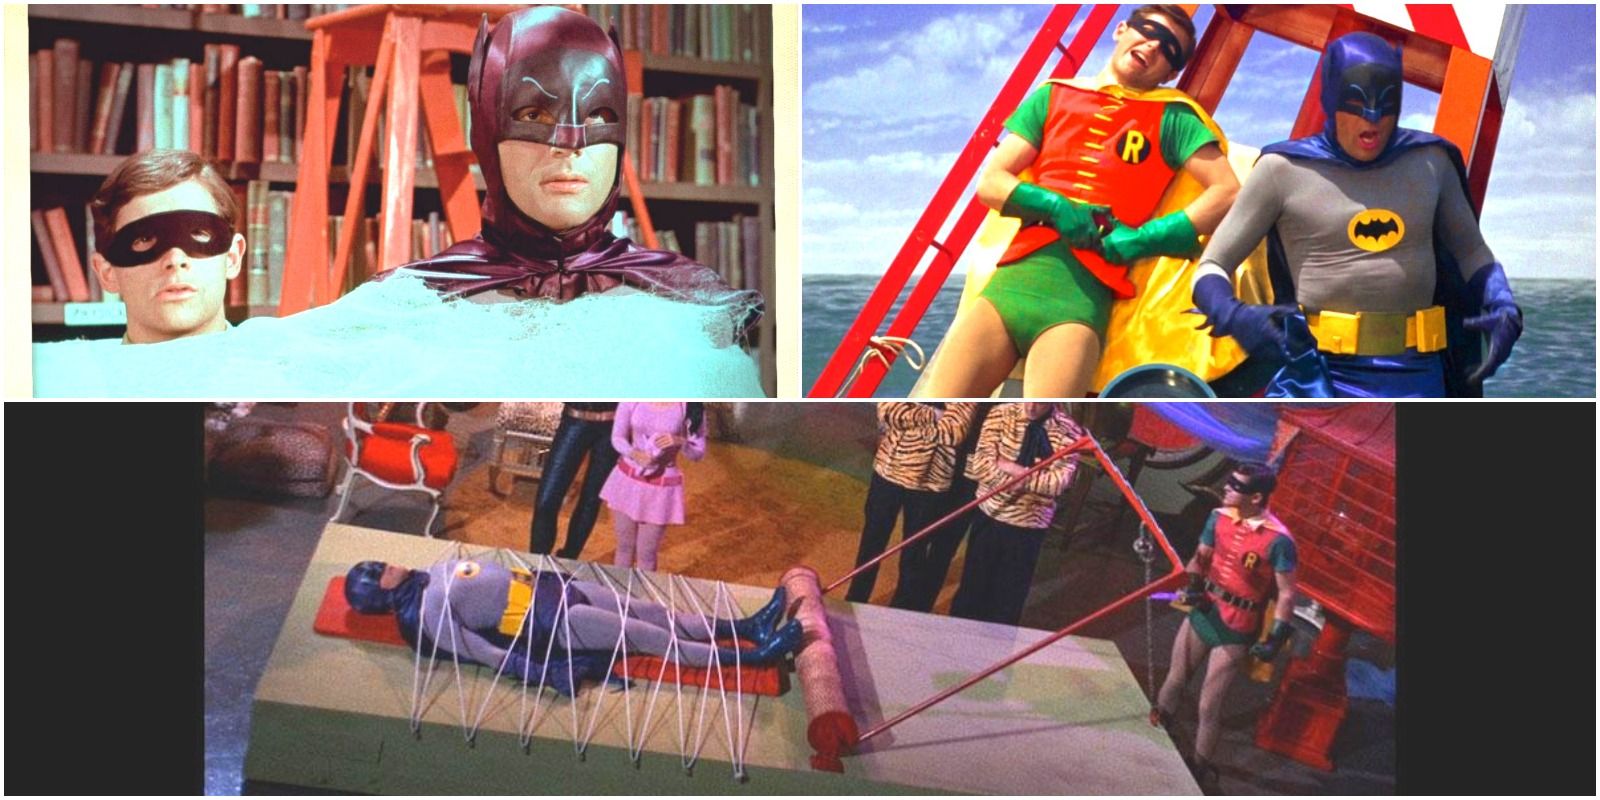 Batman and Robin in various traps from the 1966 show